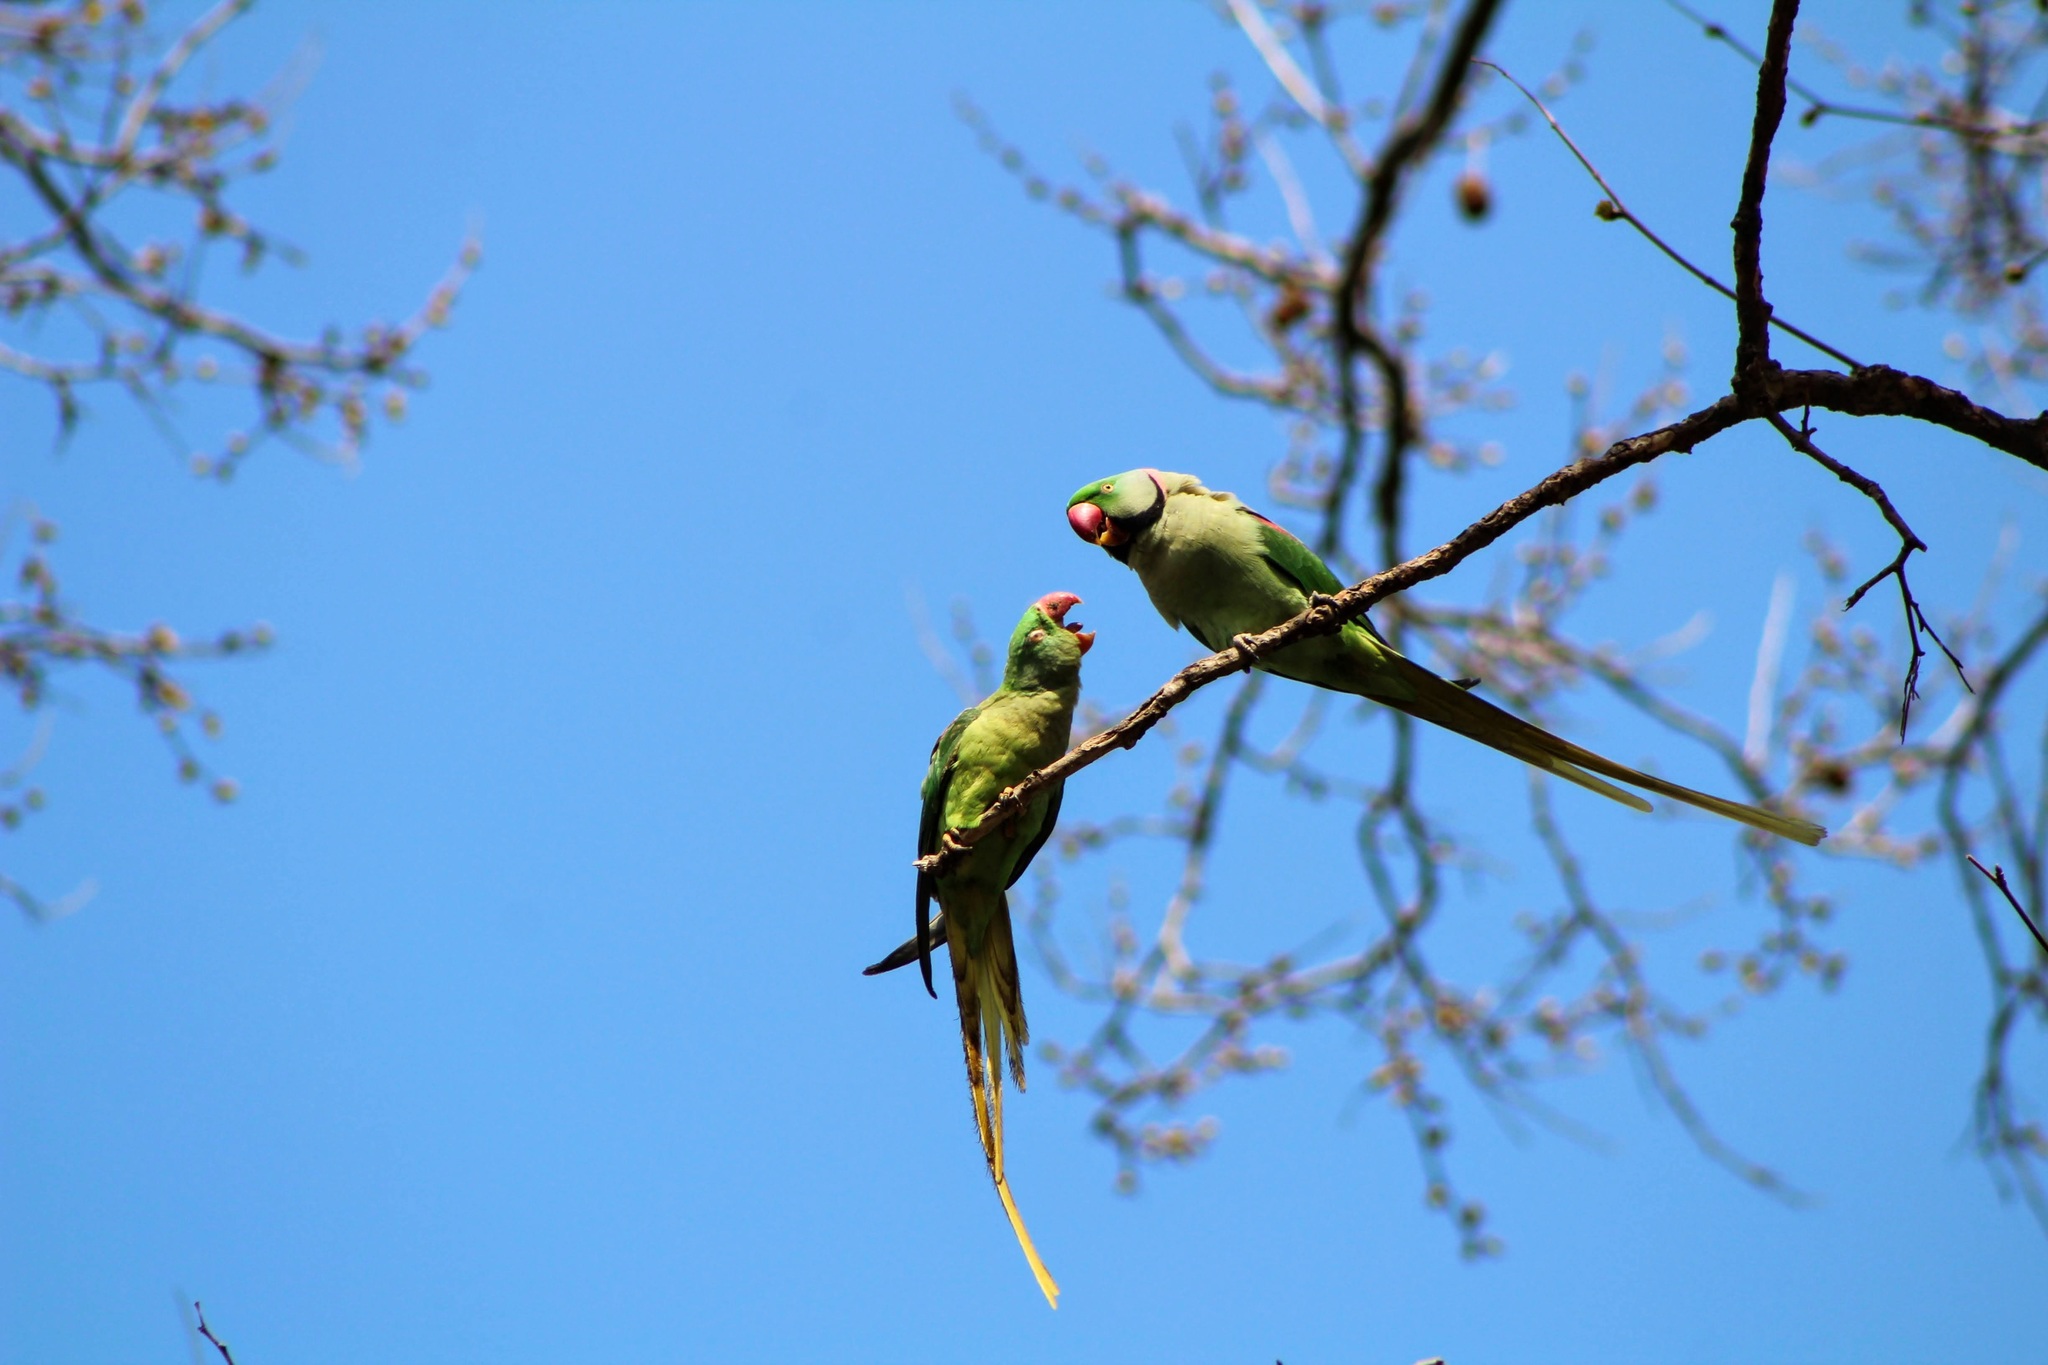 Funny parrots in the Turkish park - My, The photo, wildlife, Milota, Travels, Love, A parrot, PHOTOSESSION, Frame, , Turkey, Birds, Irony, Interesting, Lucky moment, Green, Spring, Necklace parrot